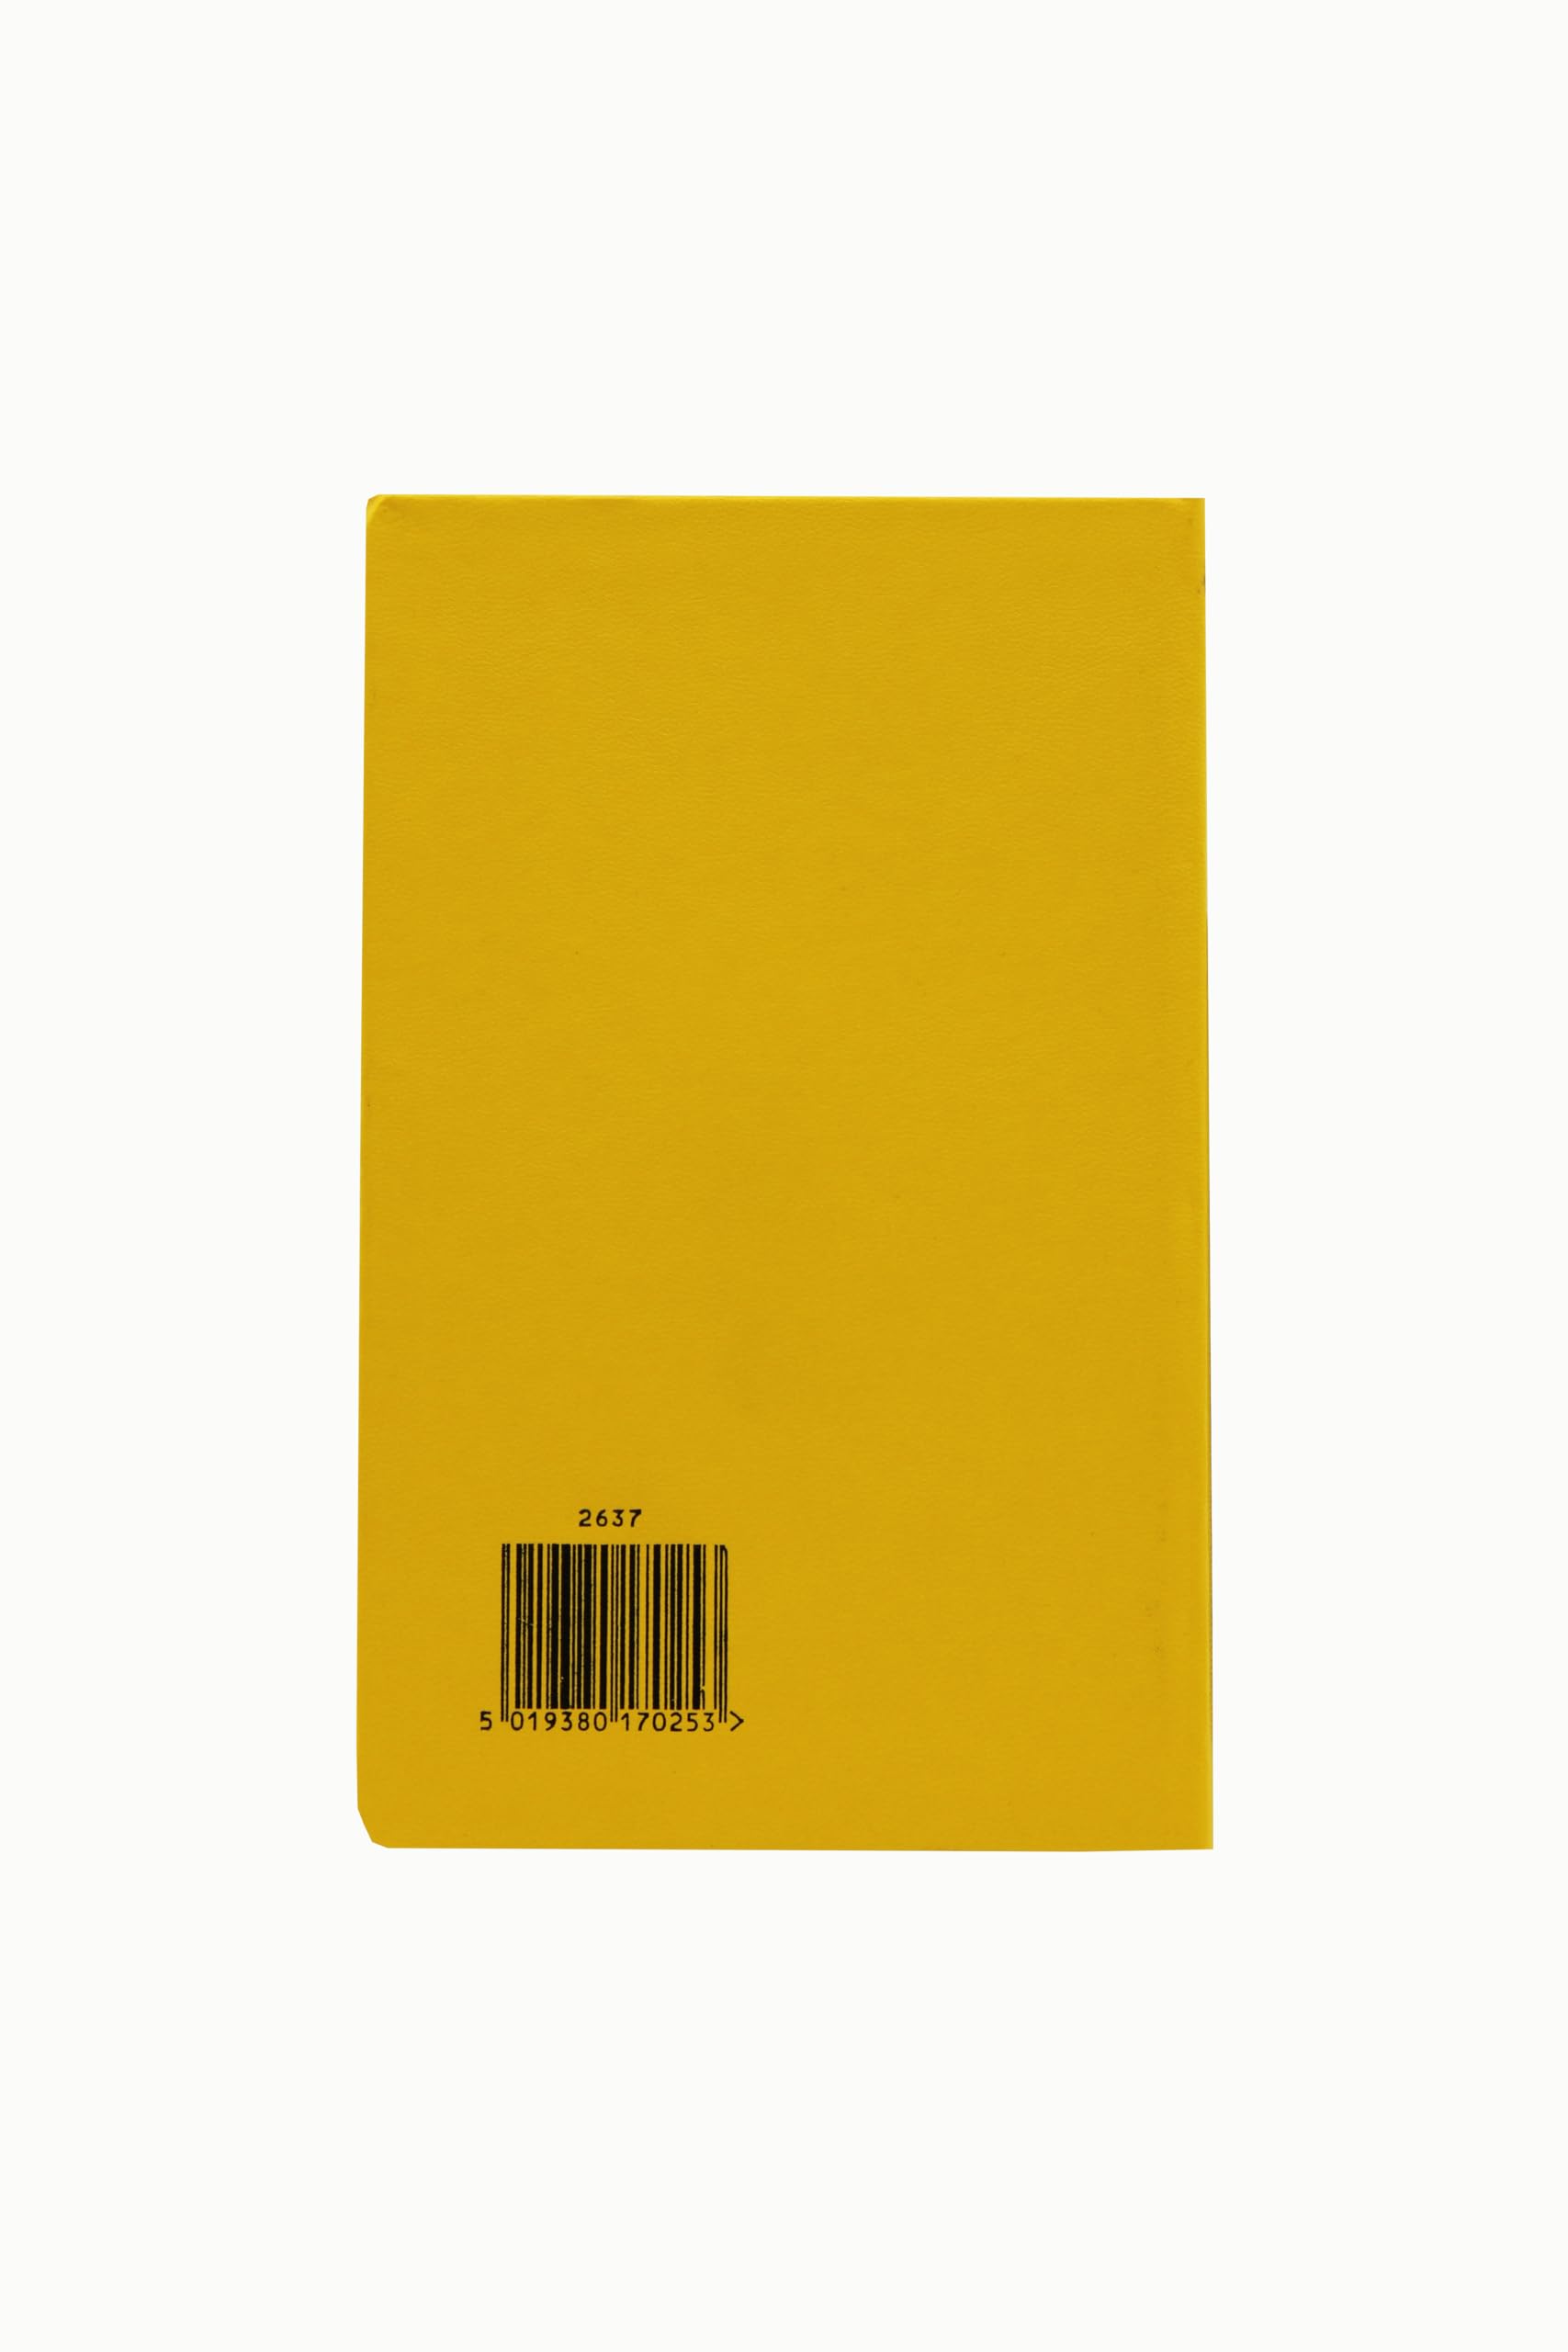 Exacompta - Ref 2637Z - Chartwell - Mining Transit Casebound Survey Book - 192 x 120mm in Size - Suitable for Use Outdoors & in Wet Conditions - Yellow